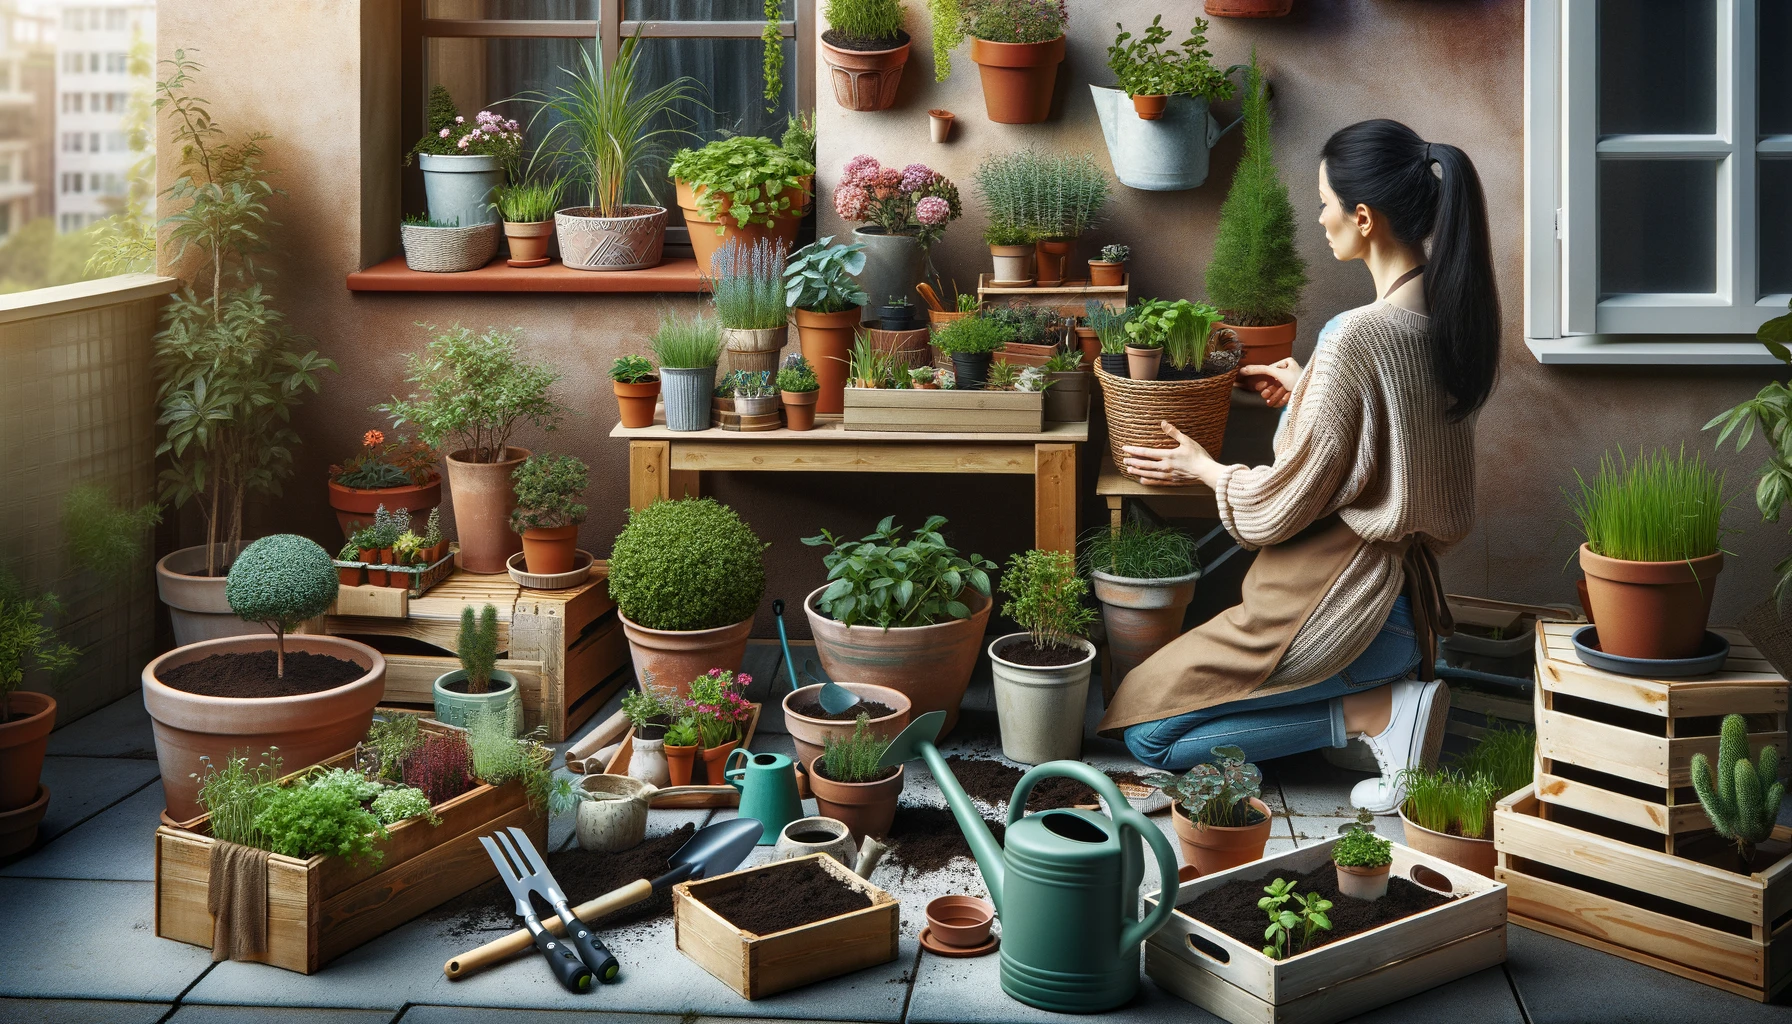 A woman arranging and planting in various containers like pots, planters, and window boxes